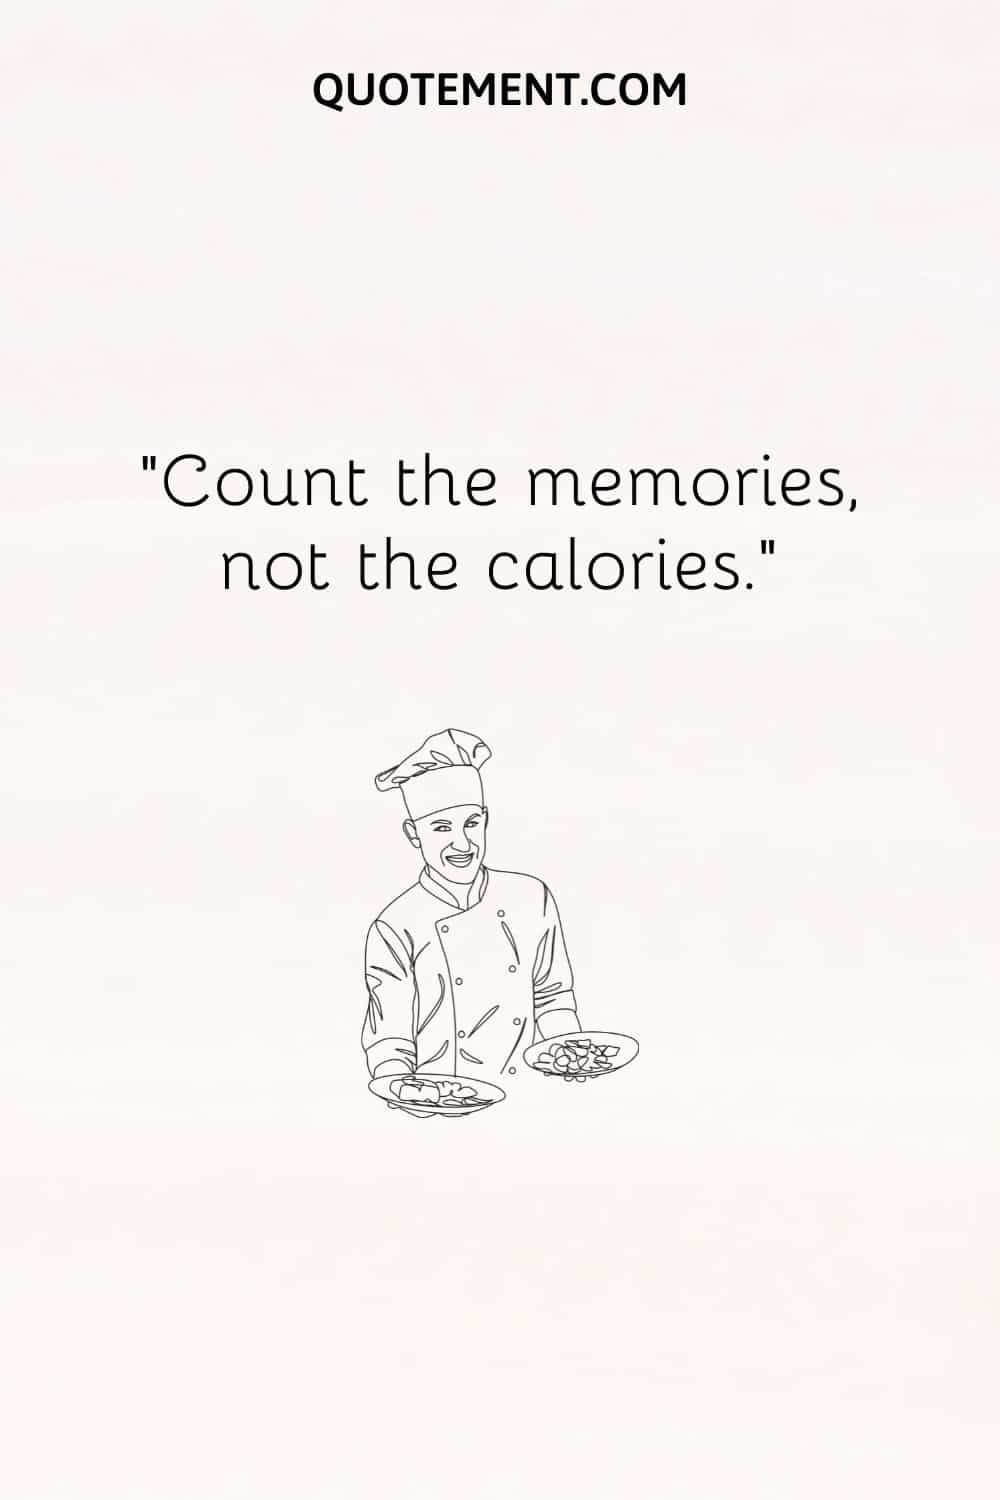 Count the memories, not the calories